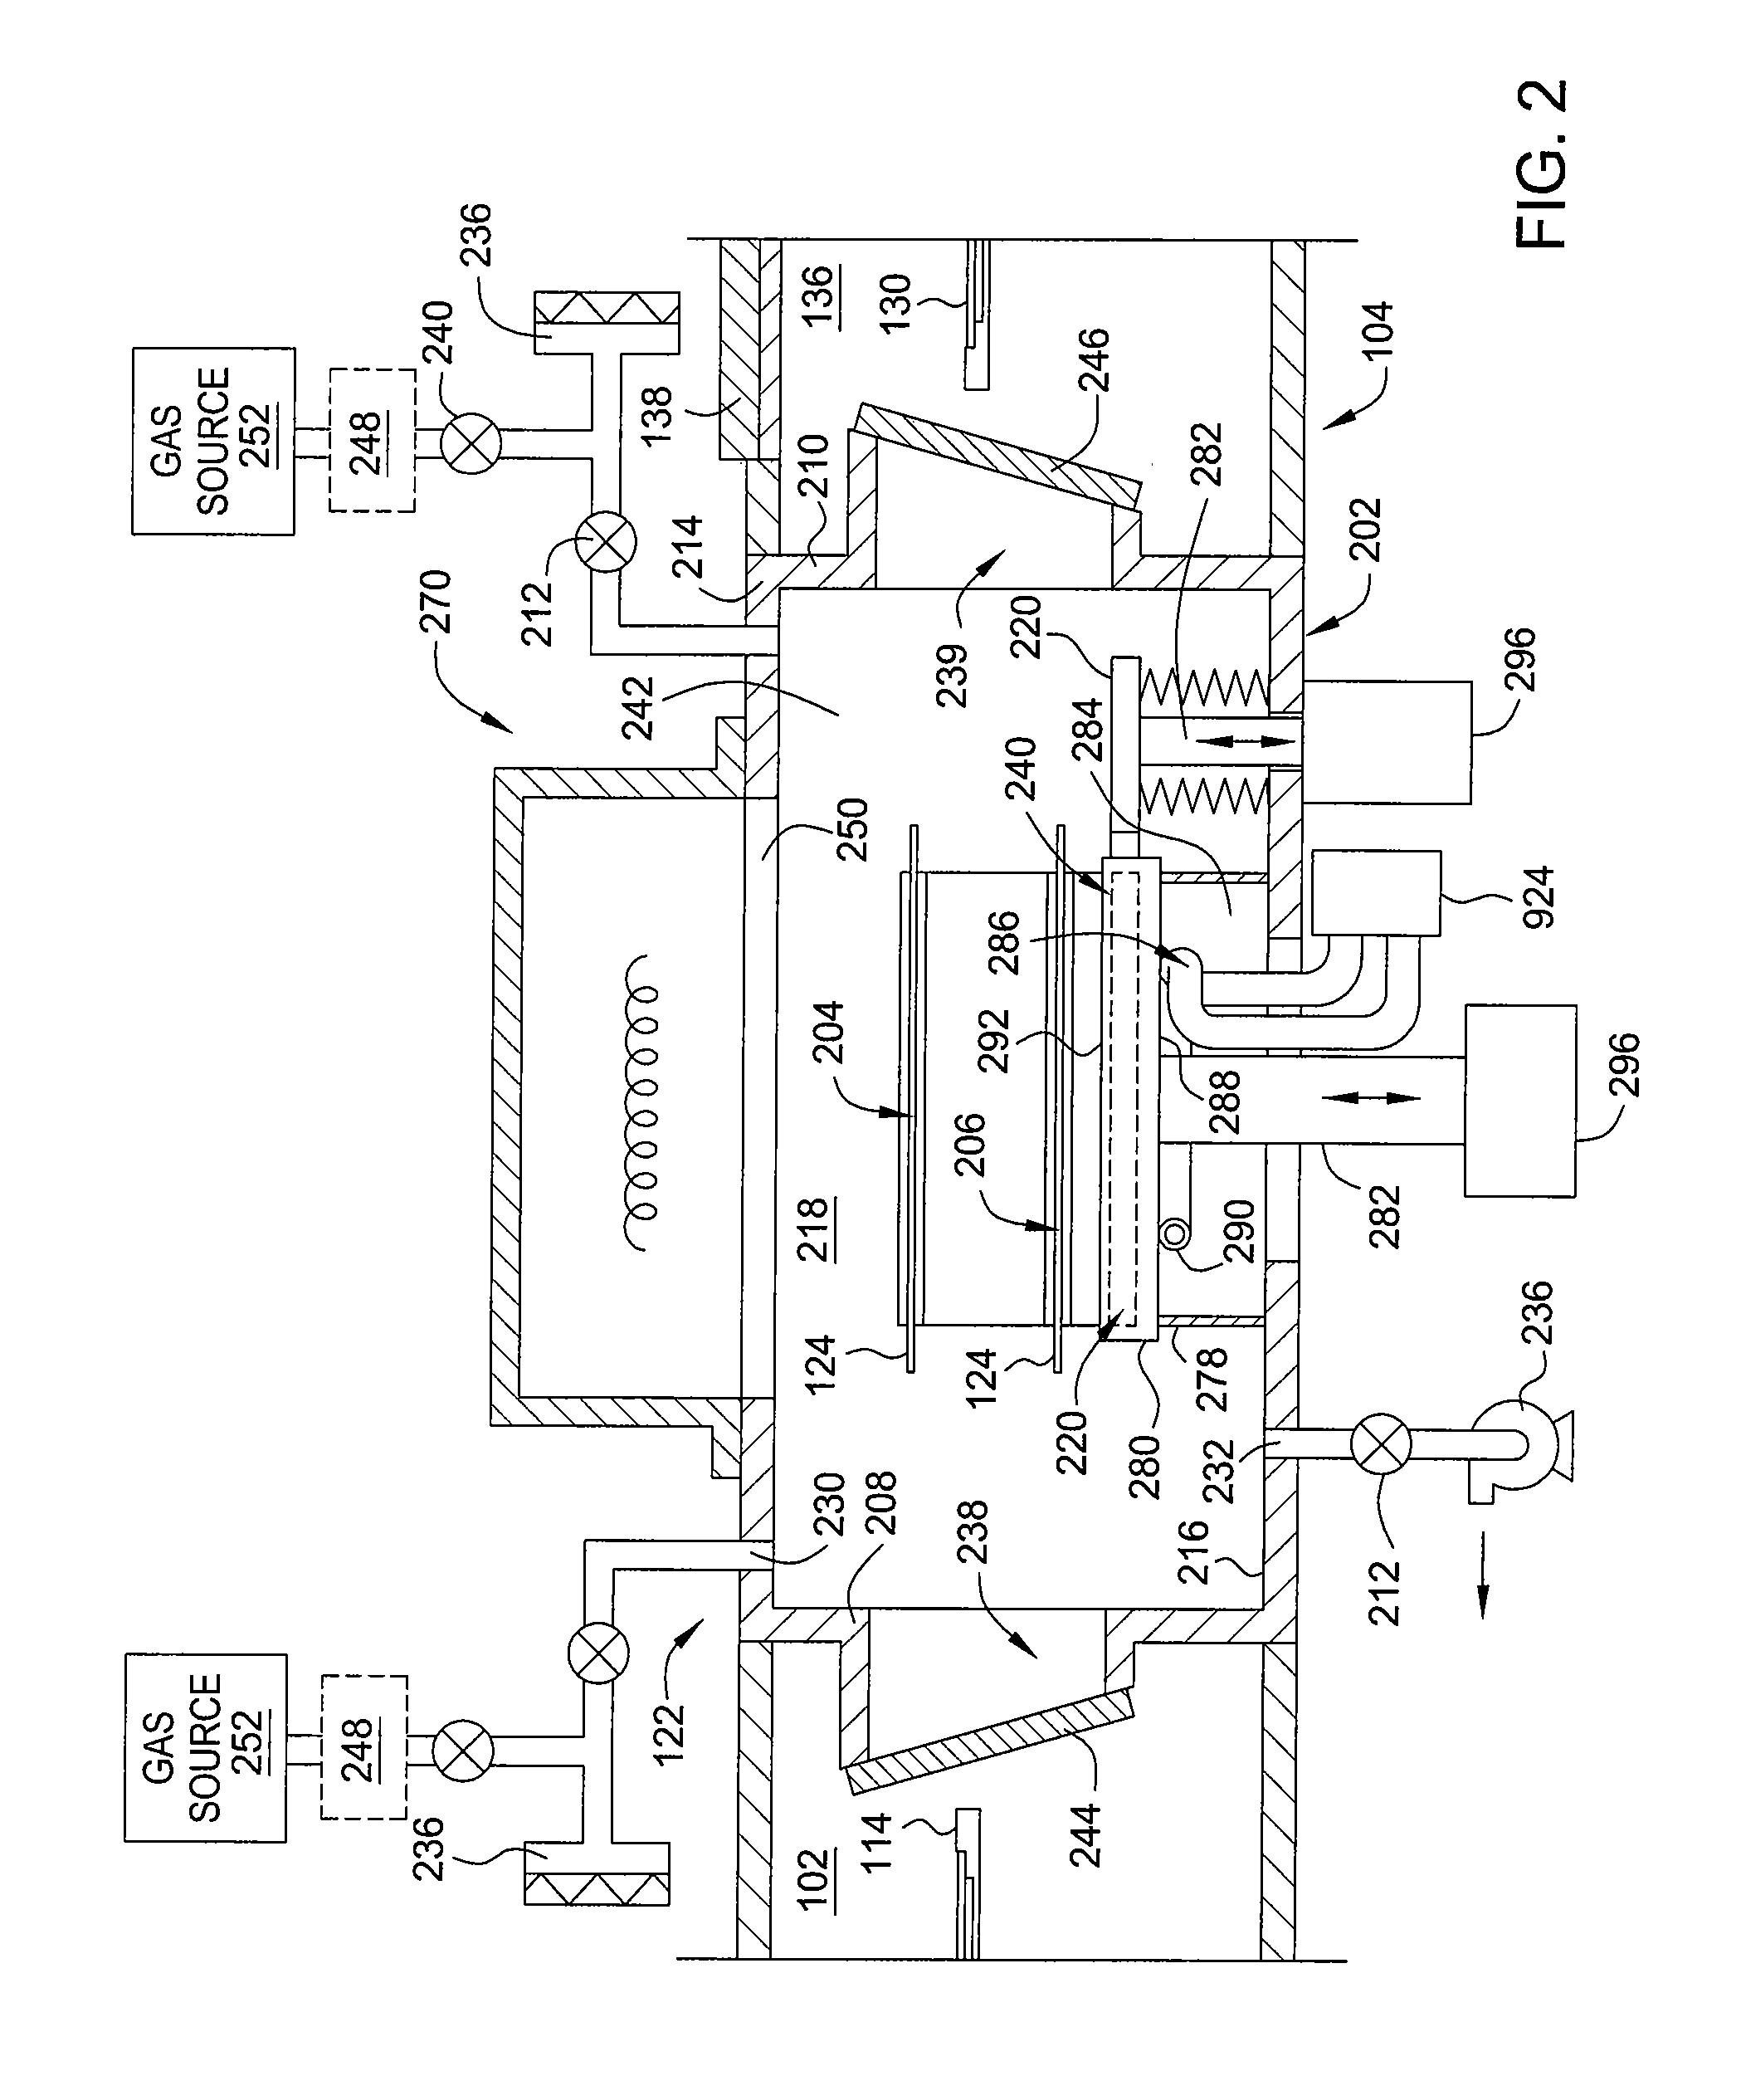 Integrated apparatus for efficient removal of halogen residues from etched substrates